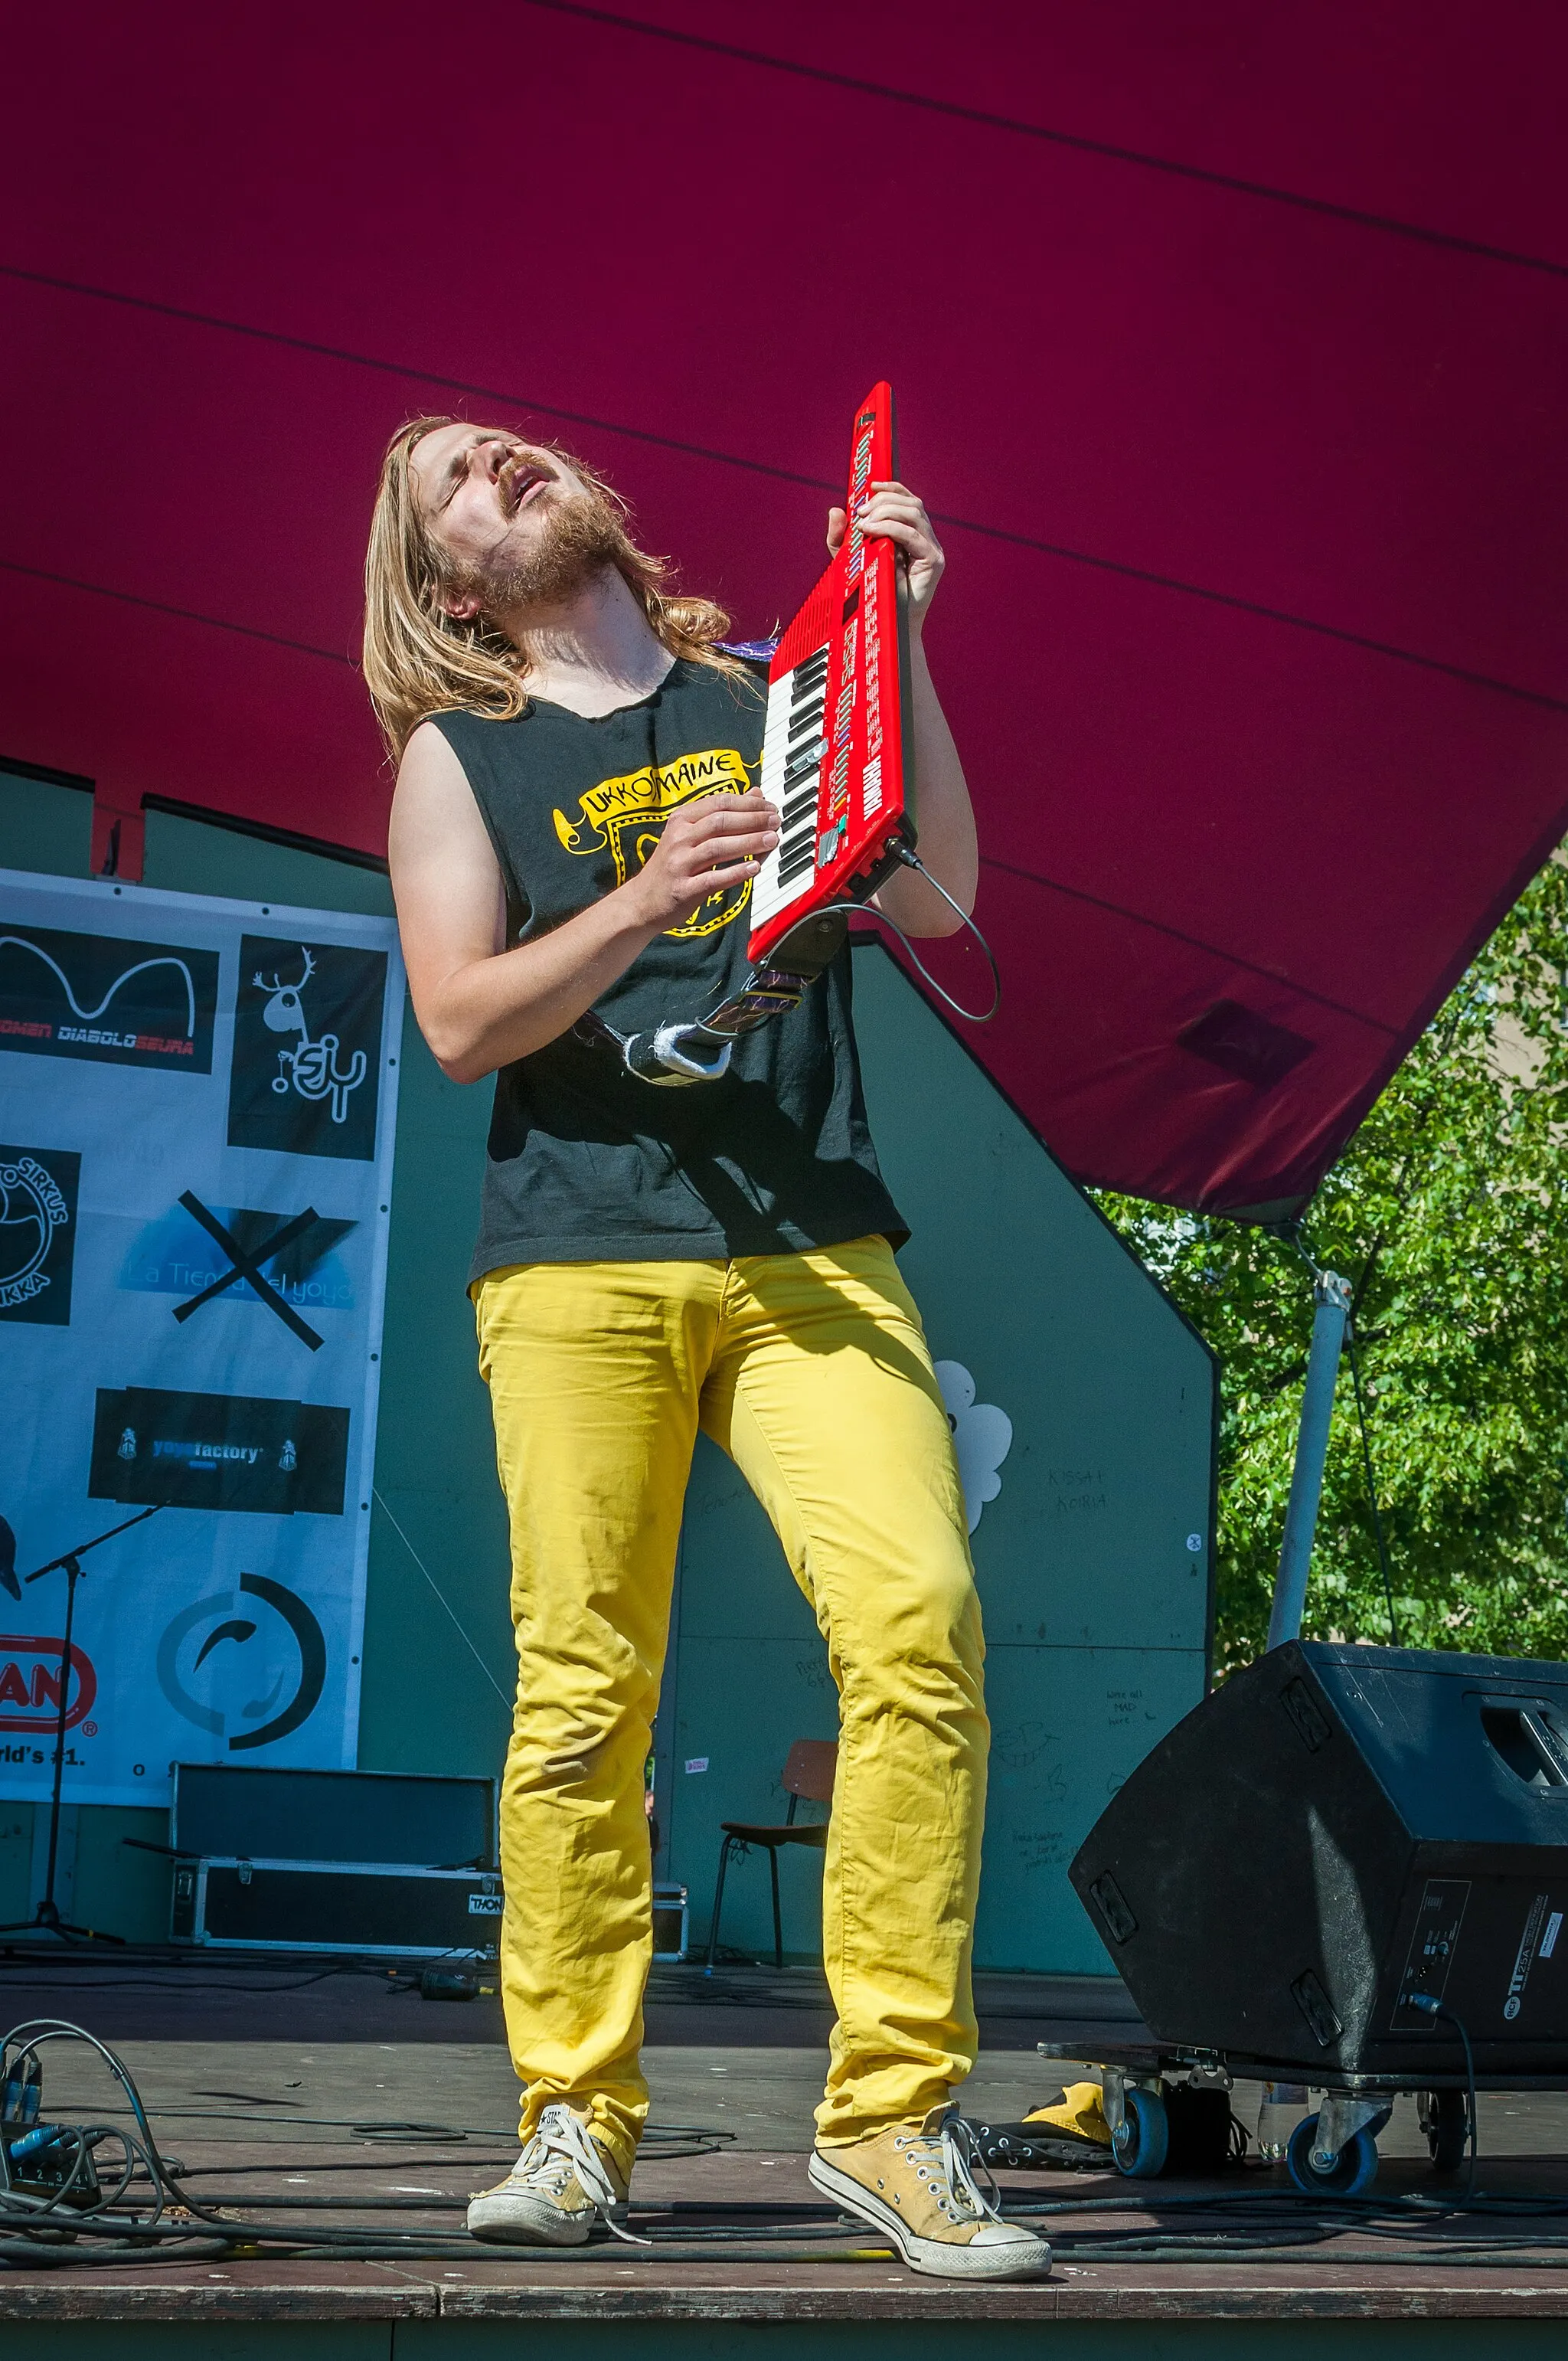 Photo showing: Finnish synth pop band Ukkosmaine performing at the Popkatu festival at the Joensuu market square in Finland.